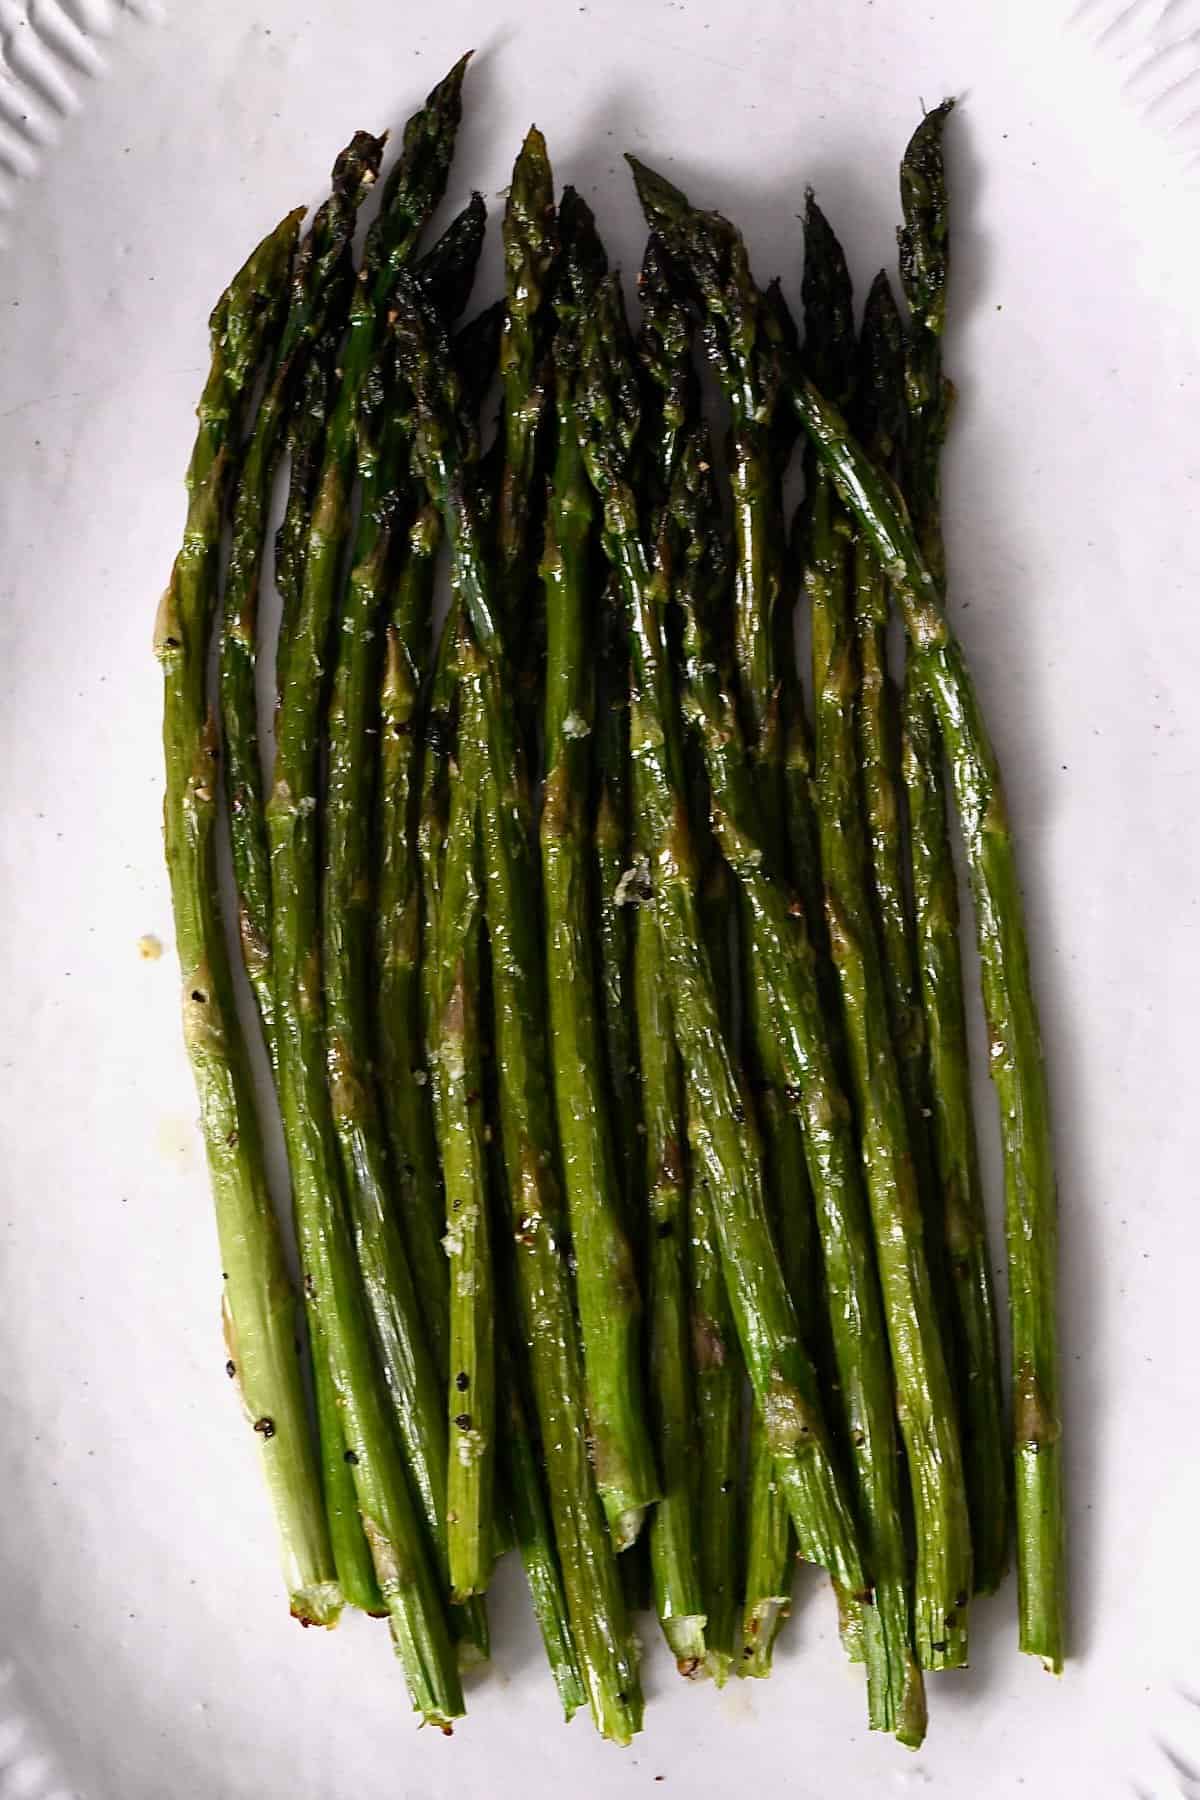 Oven roasted asparagus on a white plate